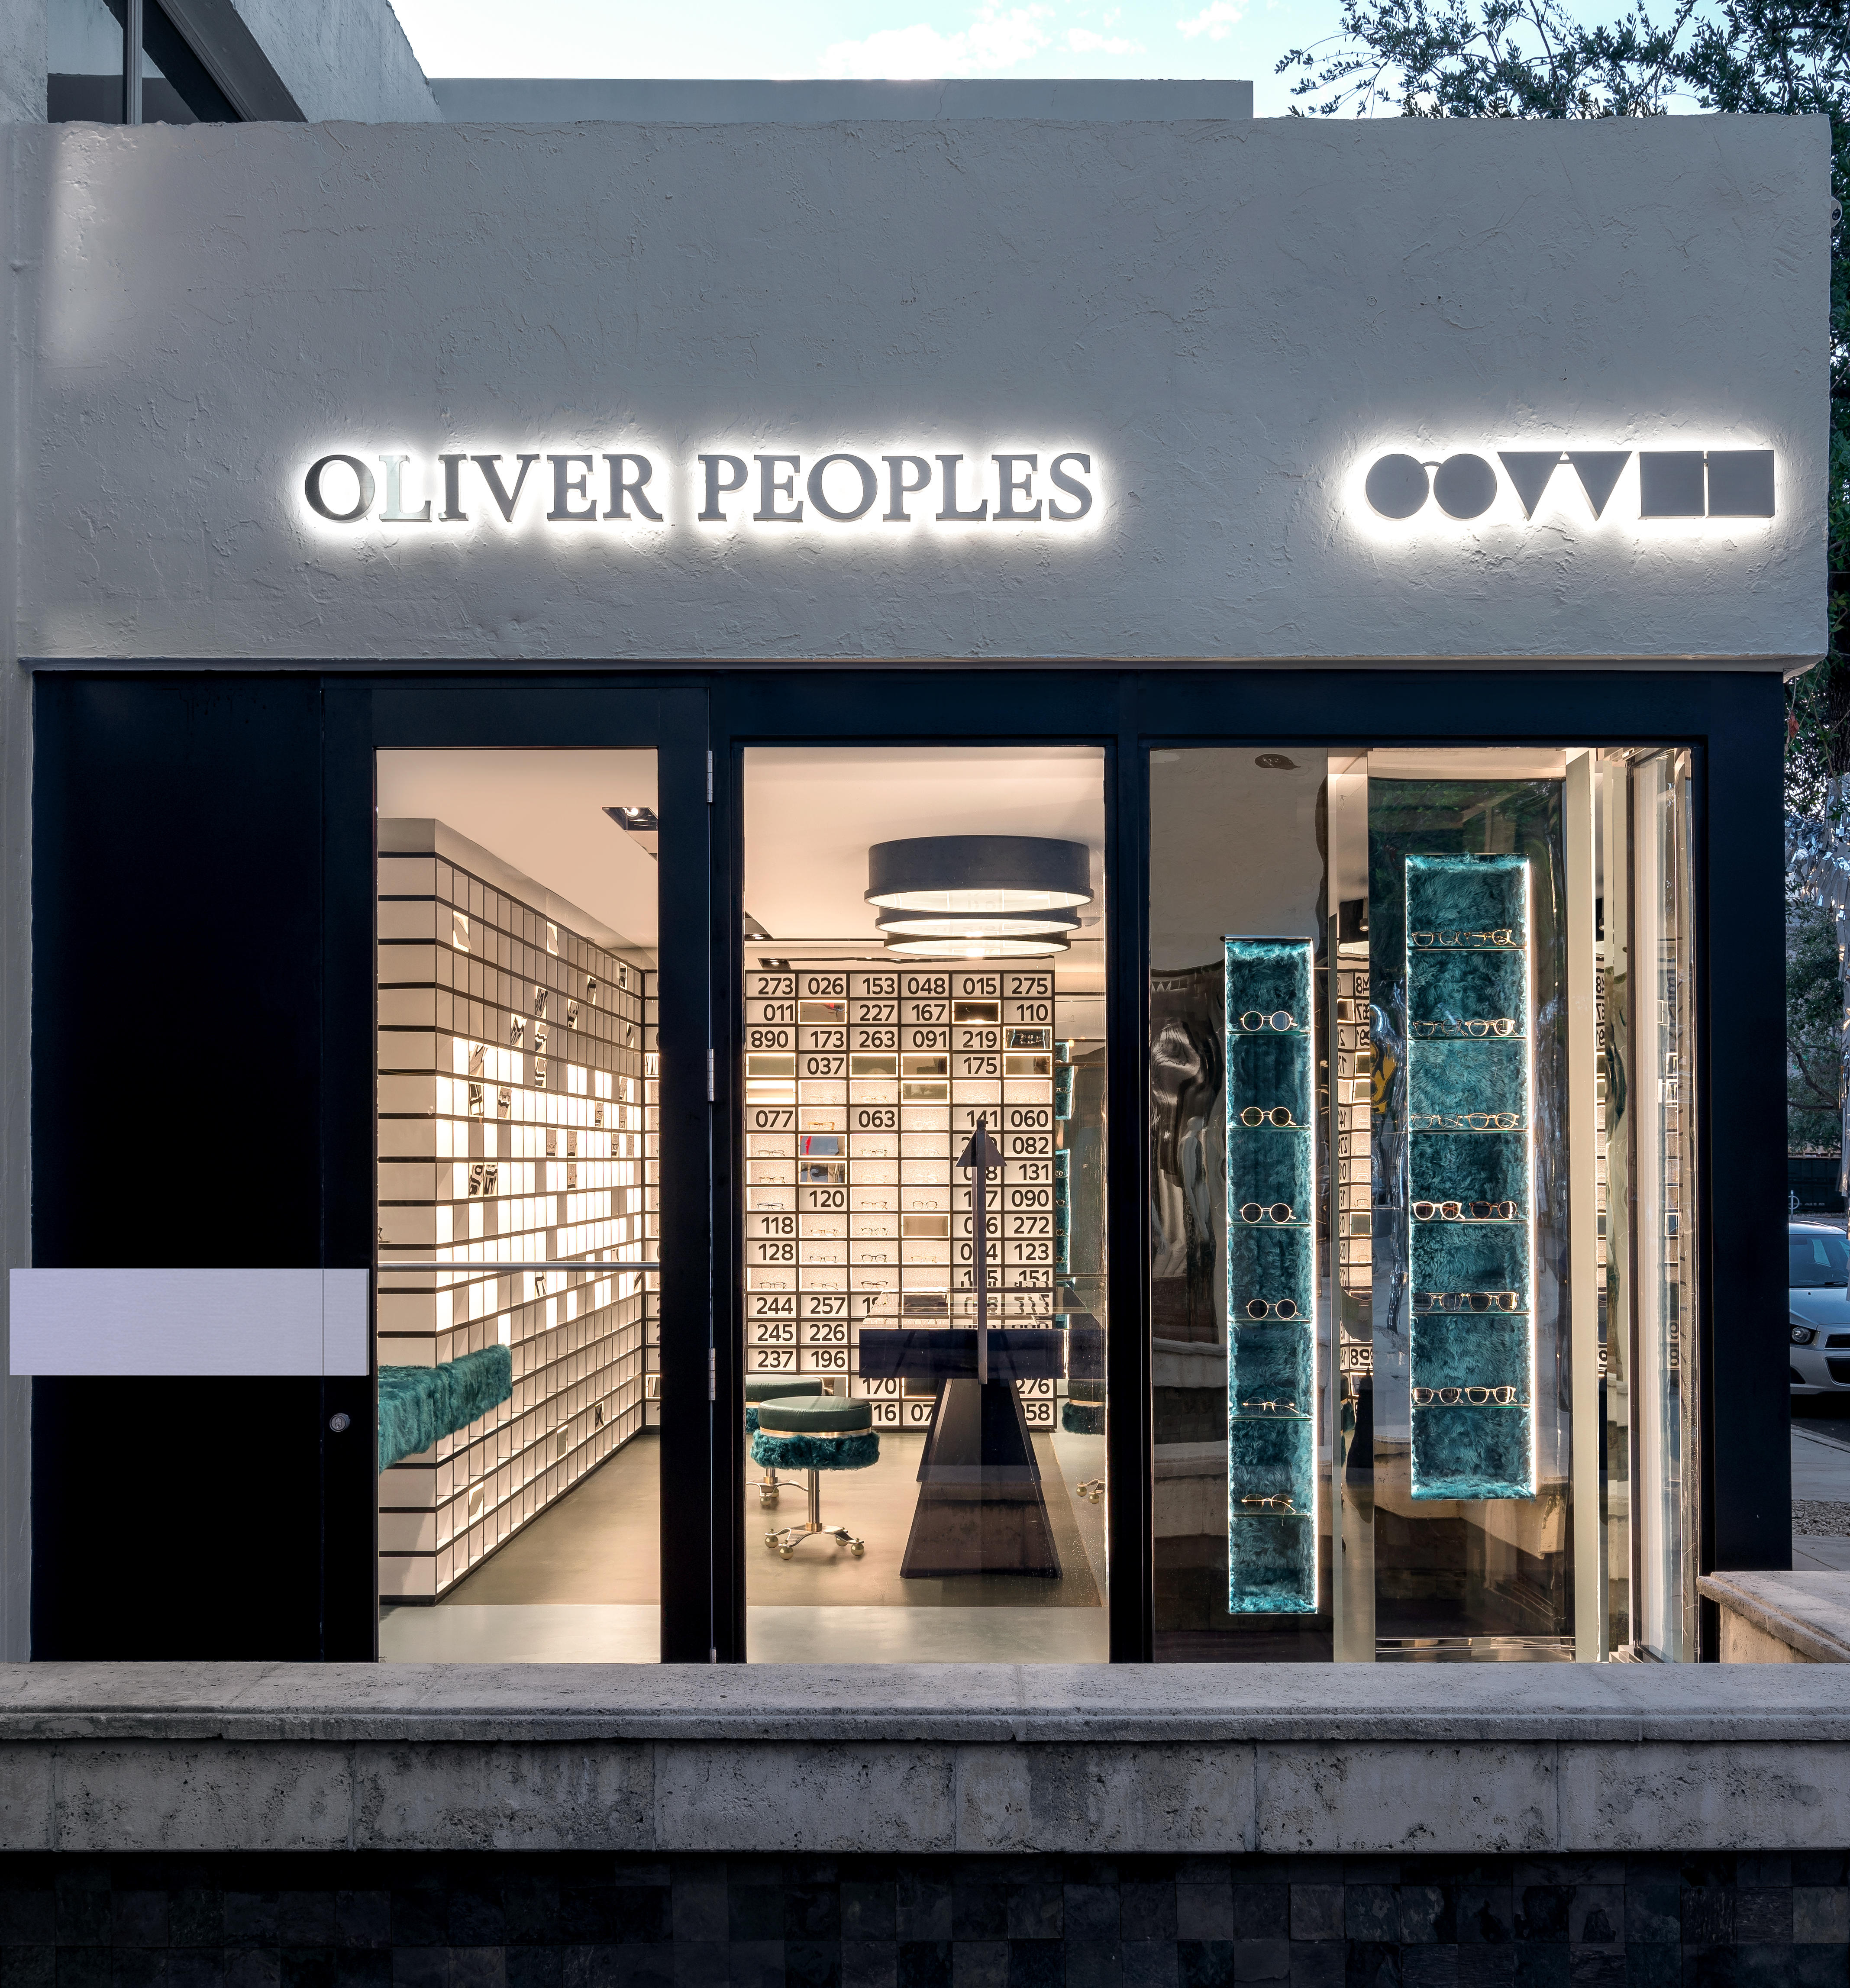 Oliver Peoples Miami (305)576-6759